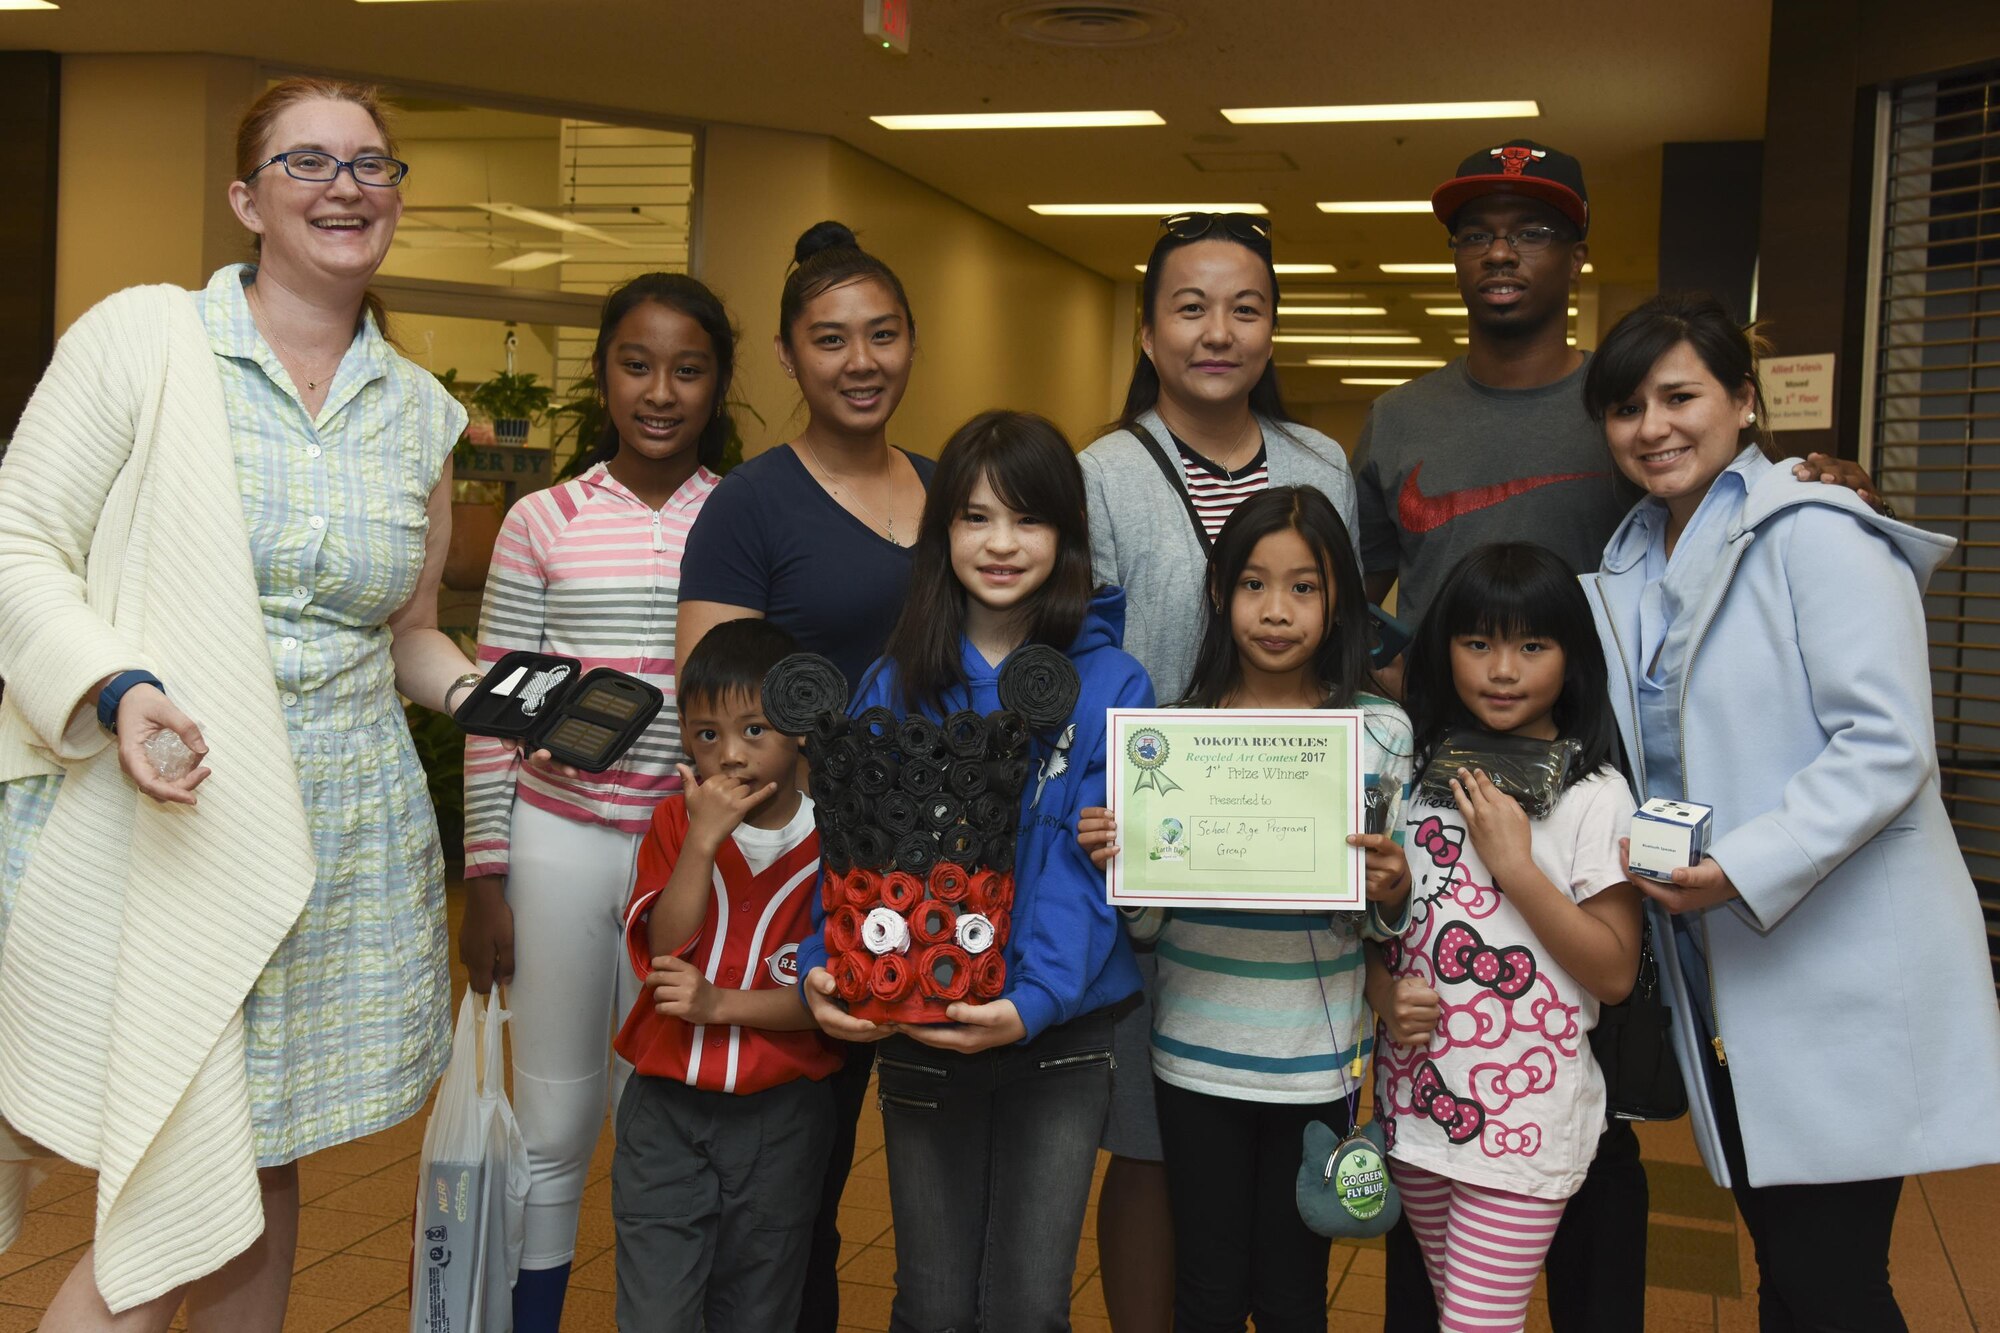 The first place winners in the group category of the Recycled Art Contest pose for a photo with teachers and event organizer April 22, 2017, at Yokota Air Base, Japan. The contest was hosted by the 374th Civil Engineer Squadron as part of the Earth Day eco-friendly activities and awarded the first place winners with a solar charger. (U.S. Air Force photo by Machiko Arita)